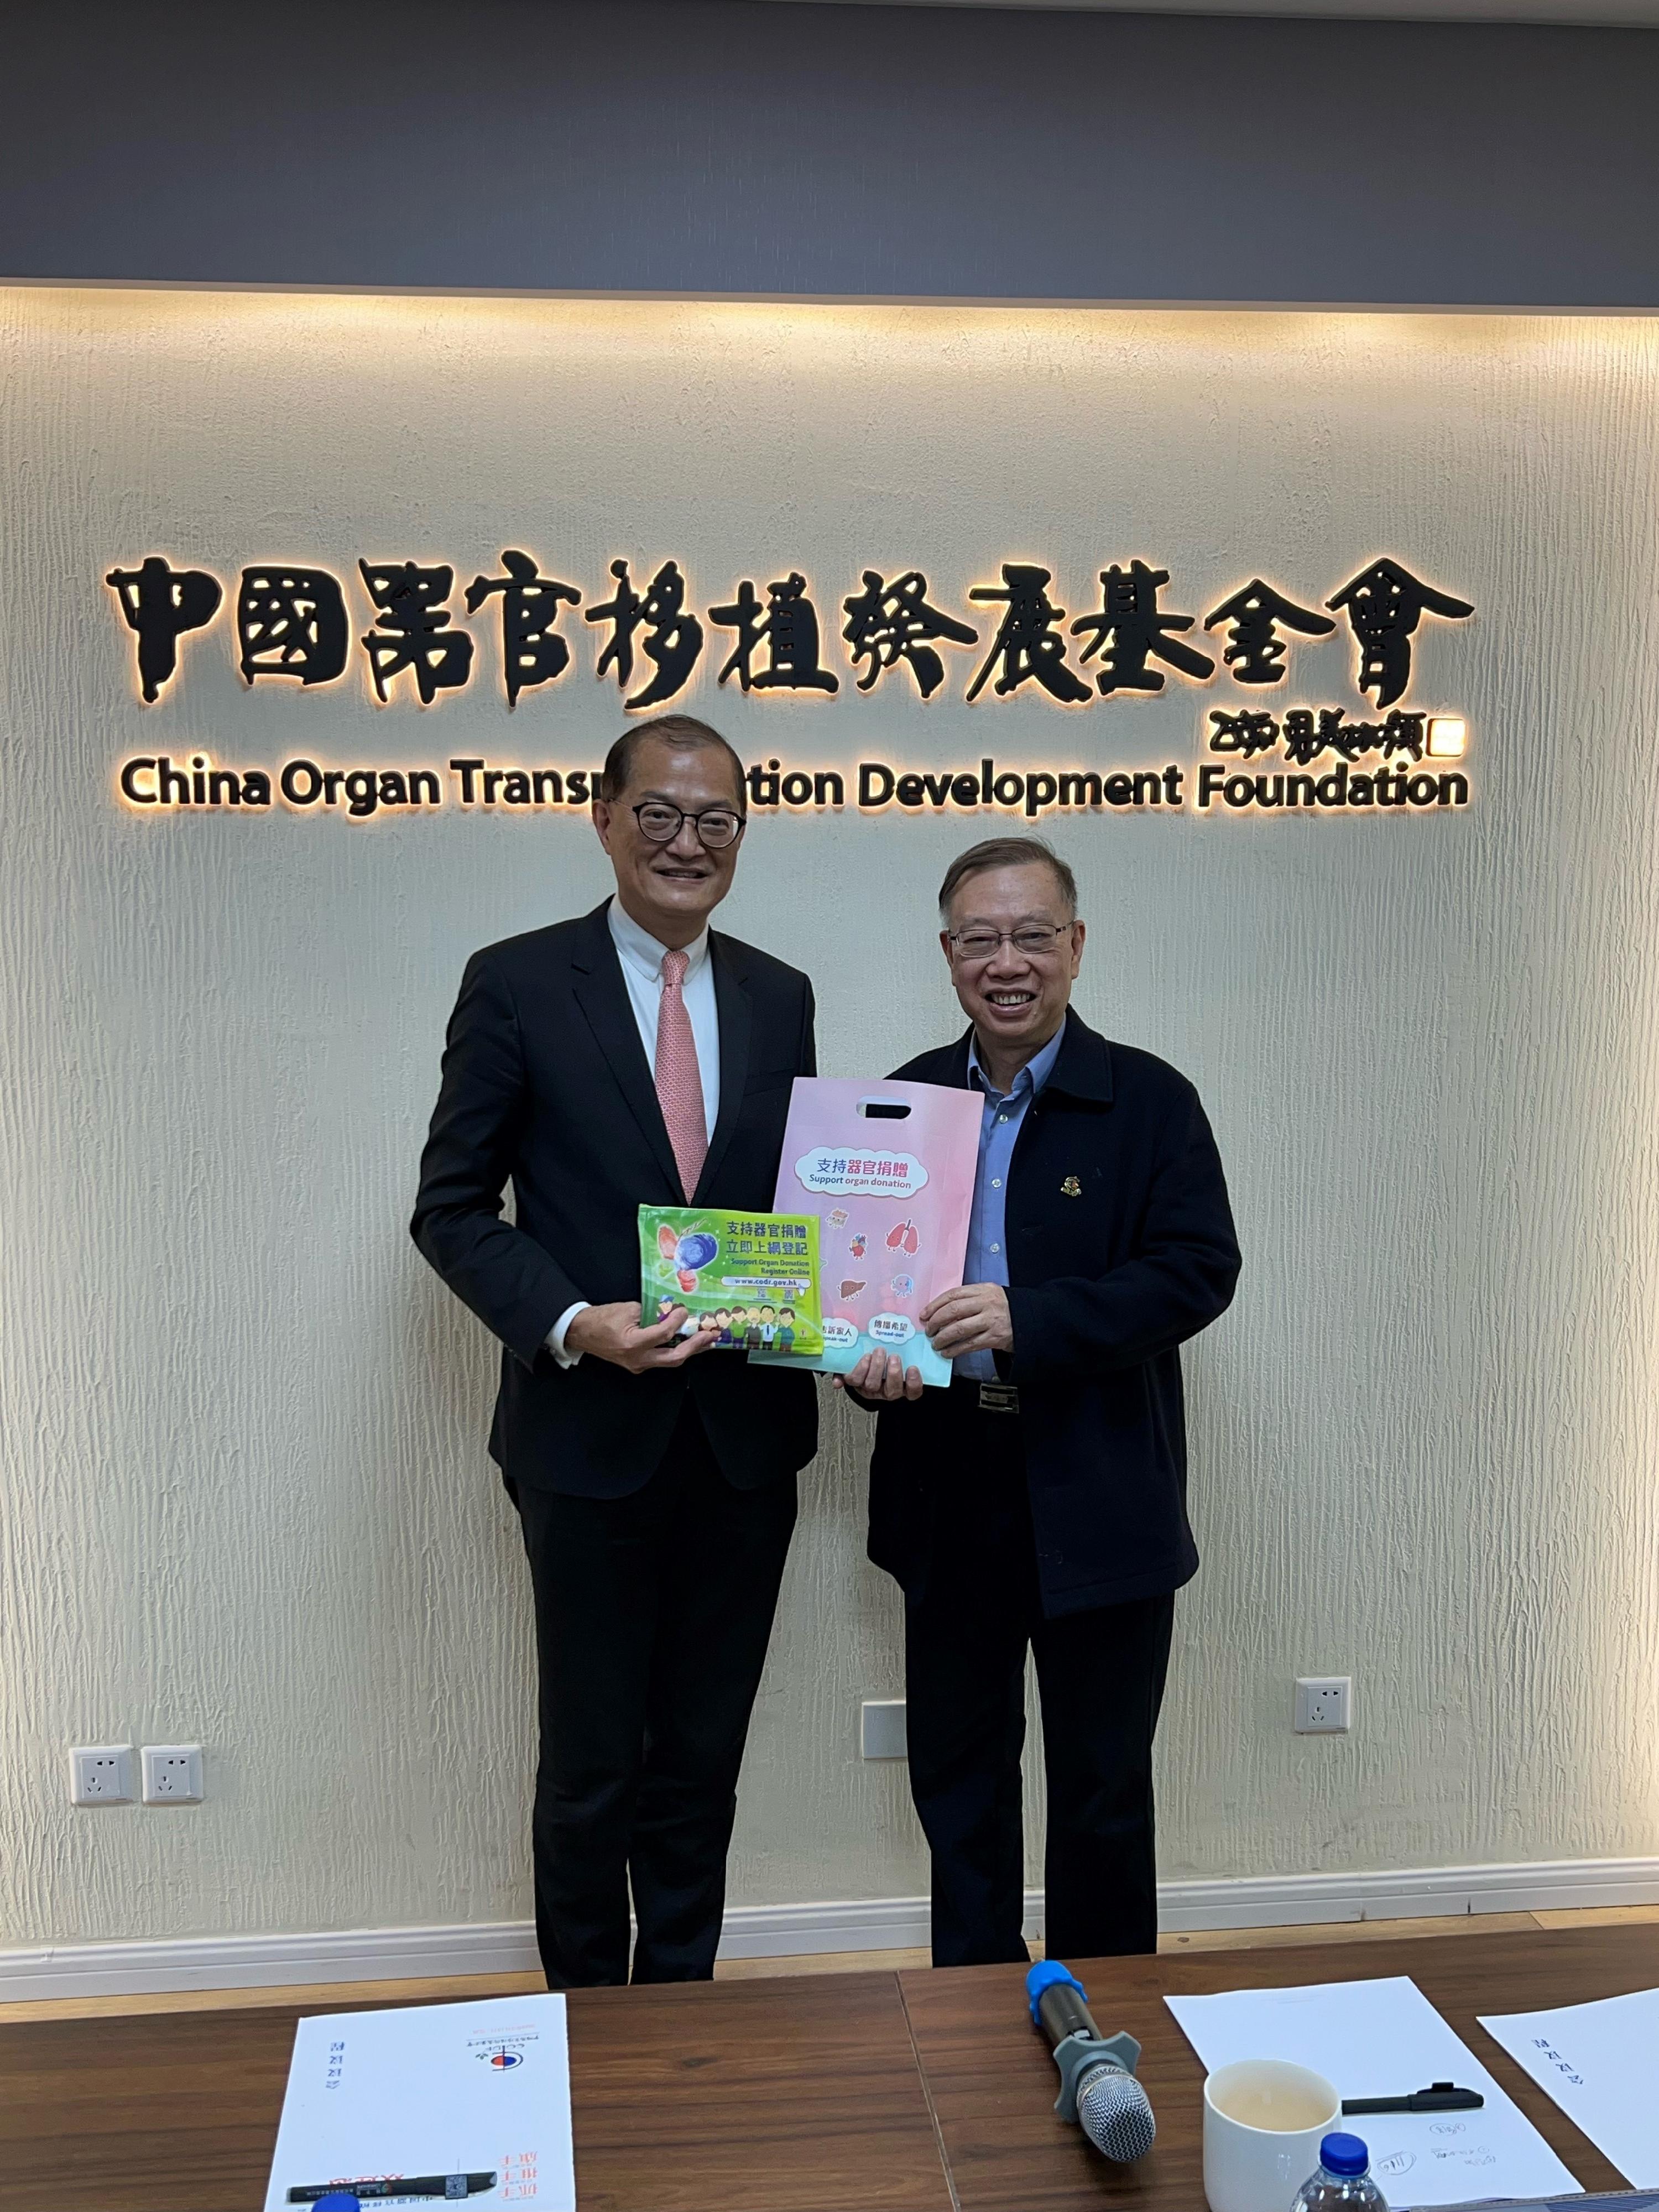 The Secretary for Health, Professor Lo Chung-mau, paid a visit to the China Organ Transplantation Development Foundation (COTDF) in Beijing this evening (March 15). Photo shows Professor Lo (left) presenting a souvenir related to organ donation in Hong Kong to the Chairman of the expert committee of the COTDF and the Chairman of the China National Organ Donation and Transplantation Committee, Professor Huang Jiefu (right).

